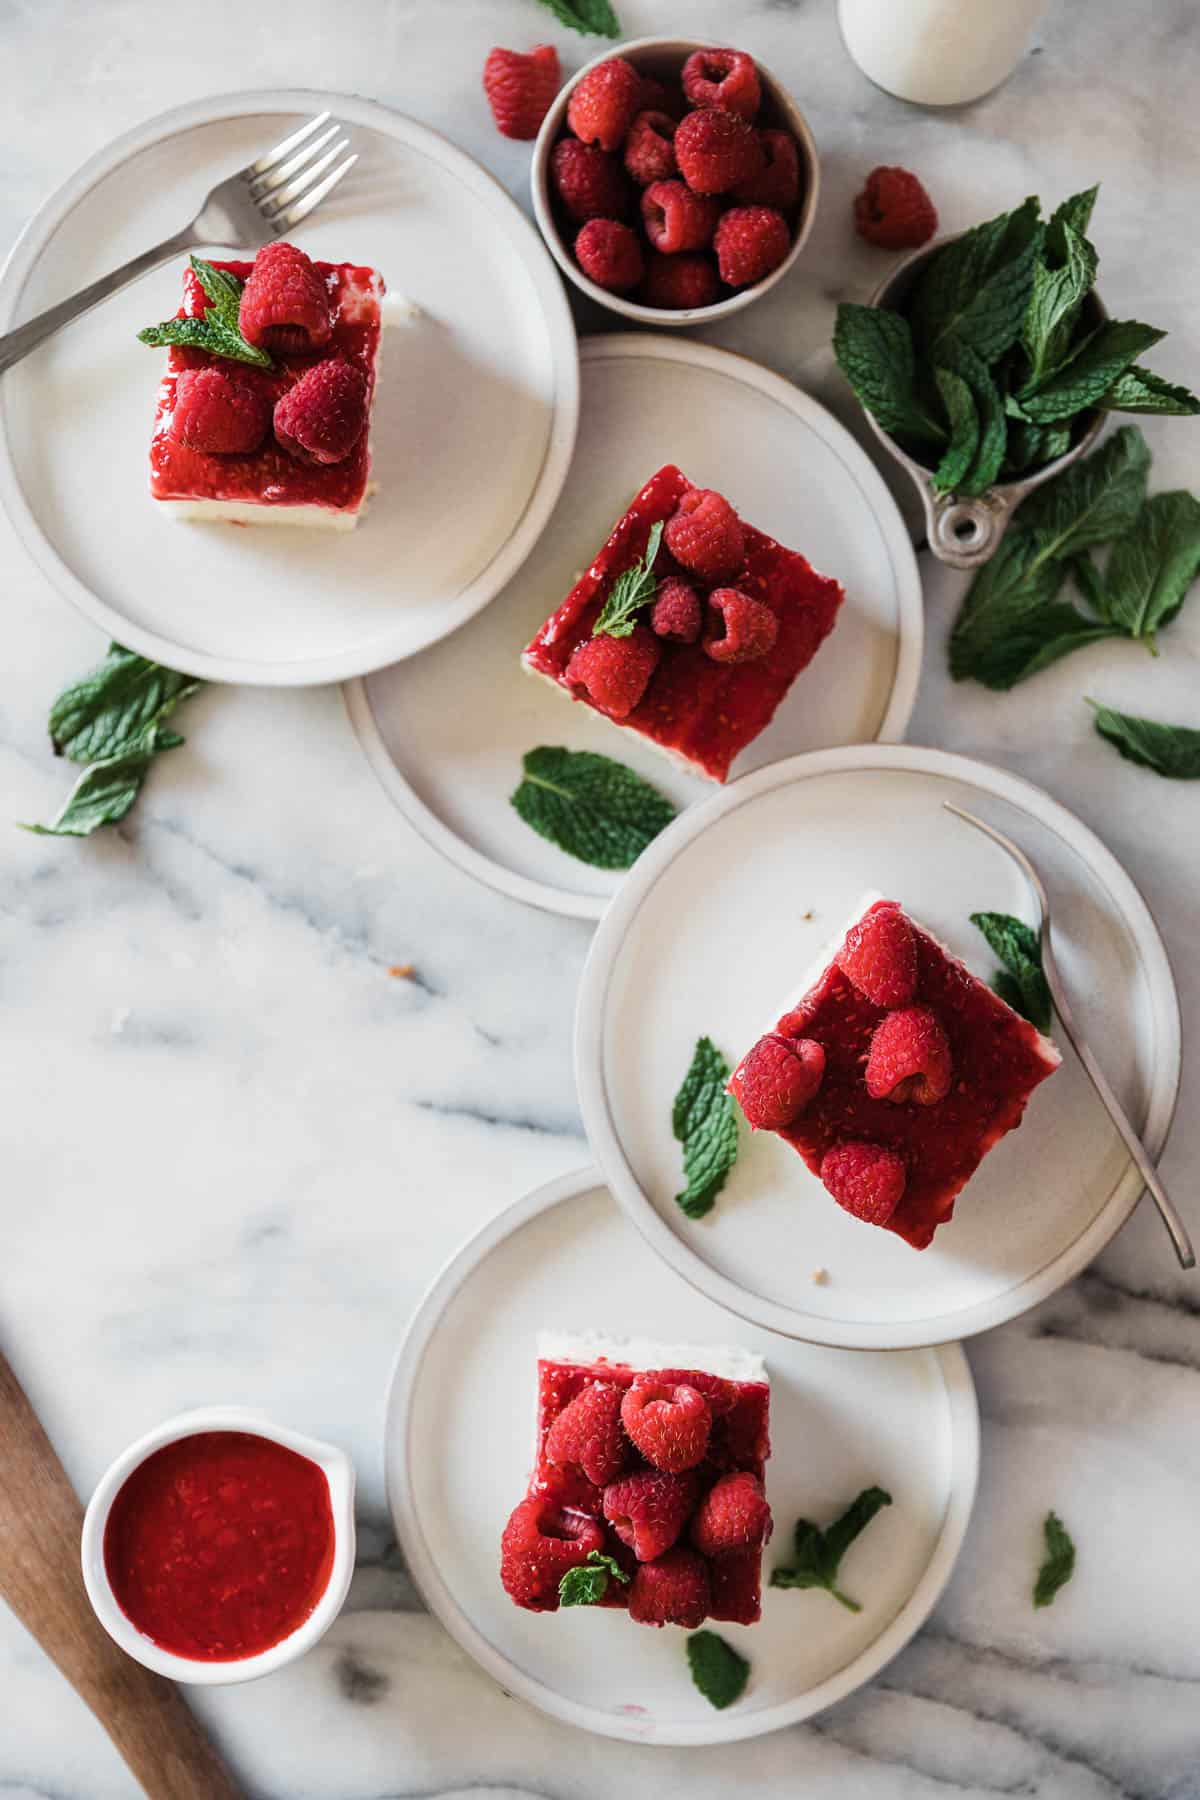 Four plates in a row, each with a slice of raspberry glazed cake. There is a small bowl of raspberries to the side and mint leave scattered.